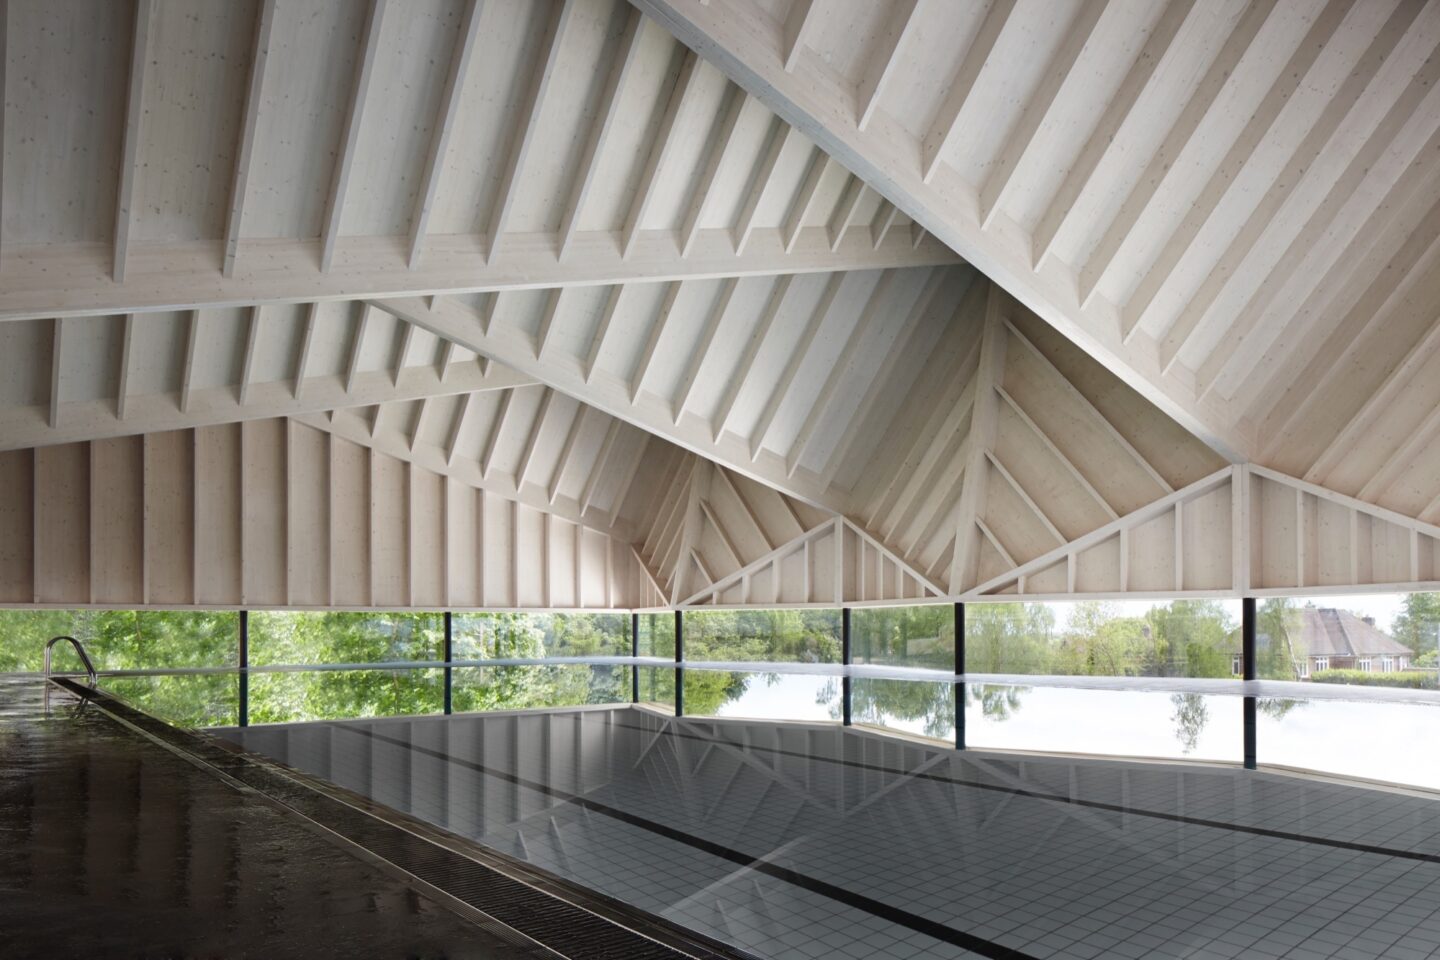 Alfriston School swimming pool featured in ‘The Structural Engineer’